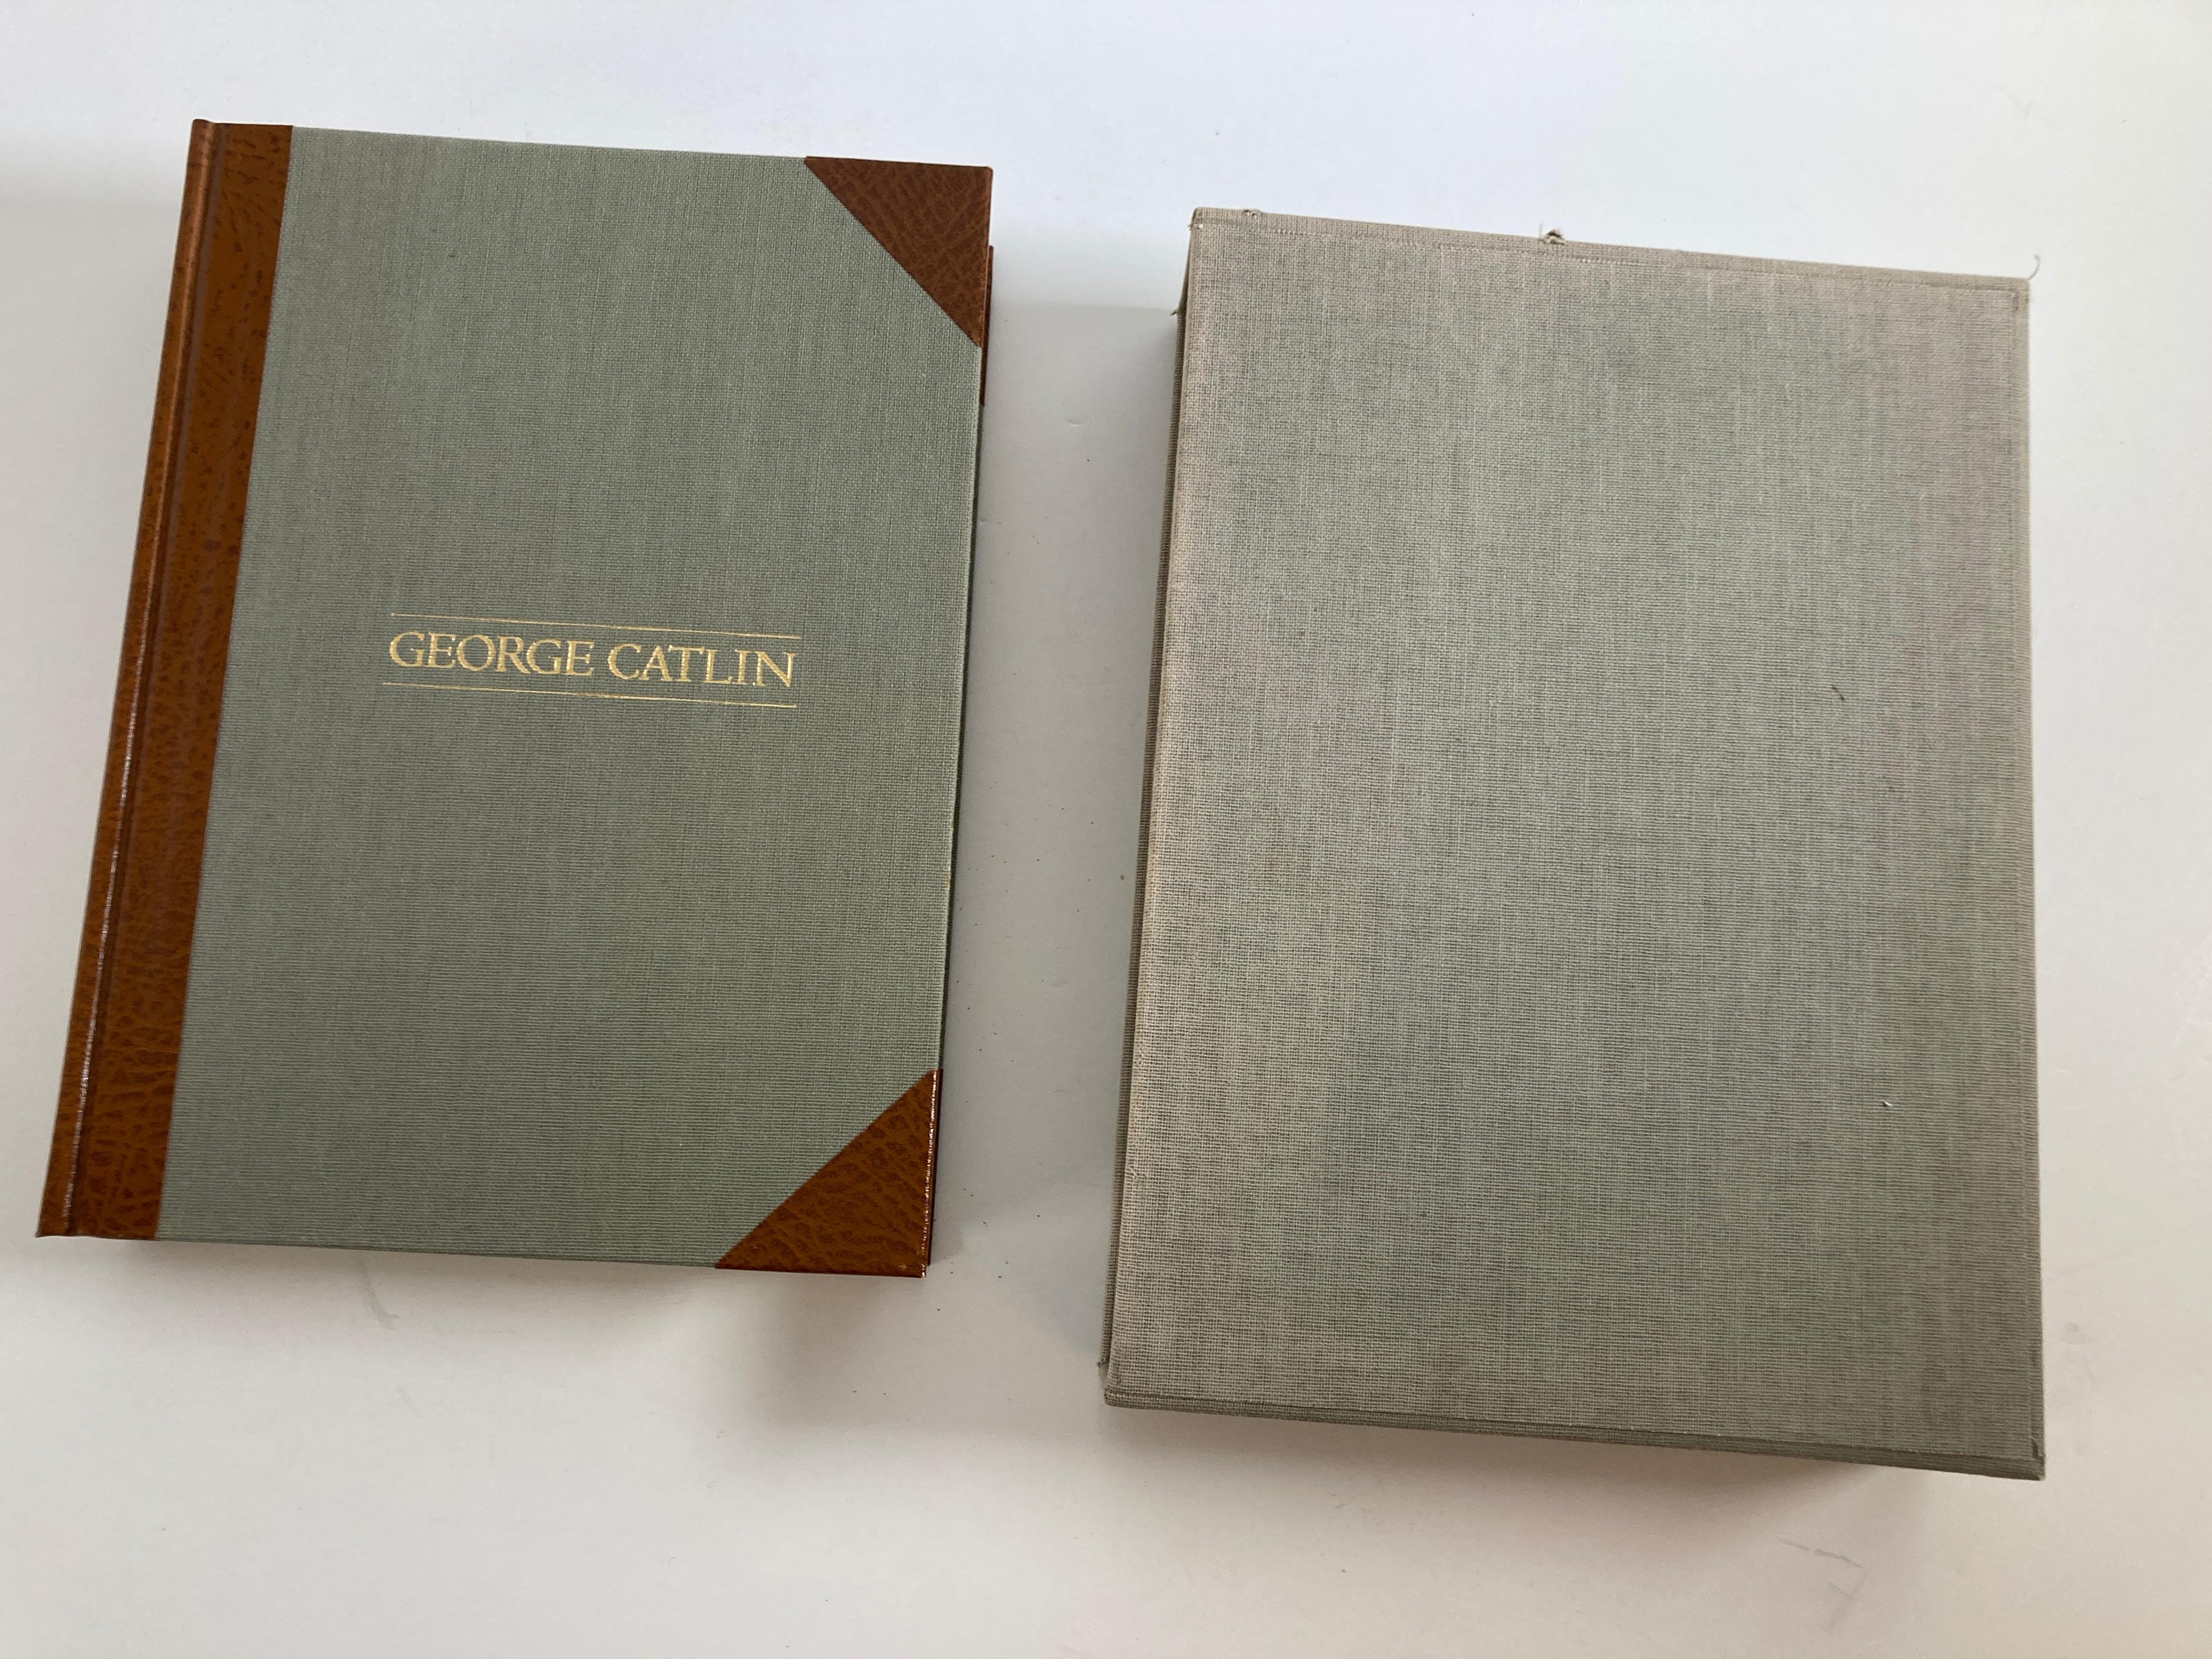 Drawings Of The North American Indians
By Catlin, George
First edition. Hardcover. Very good. Stated first edition, half bound; leather over tan cloth. Cloth slipcase shows some light handling and toning at the edges of the opening. A well kept